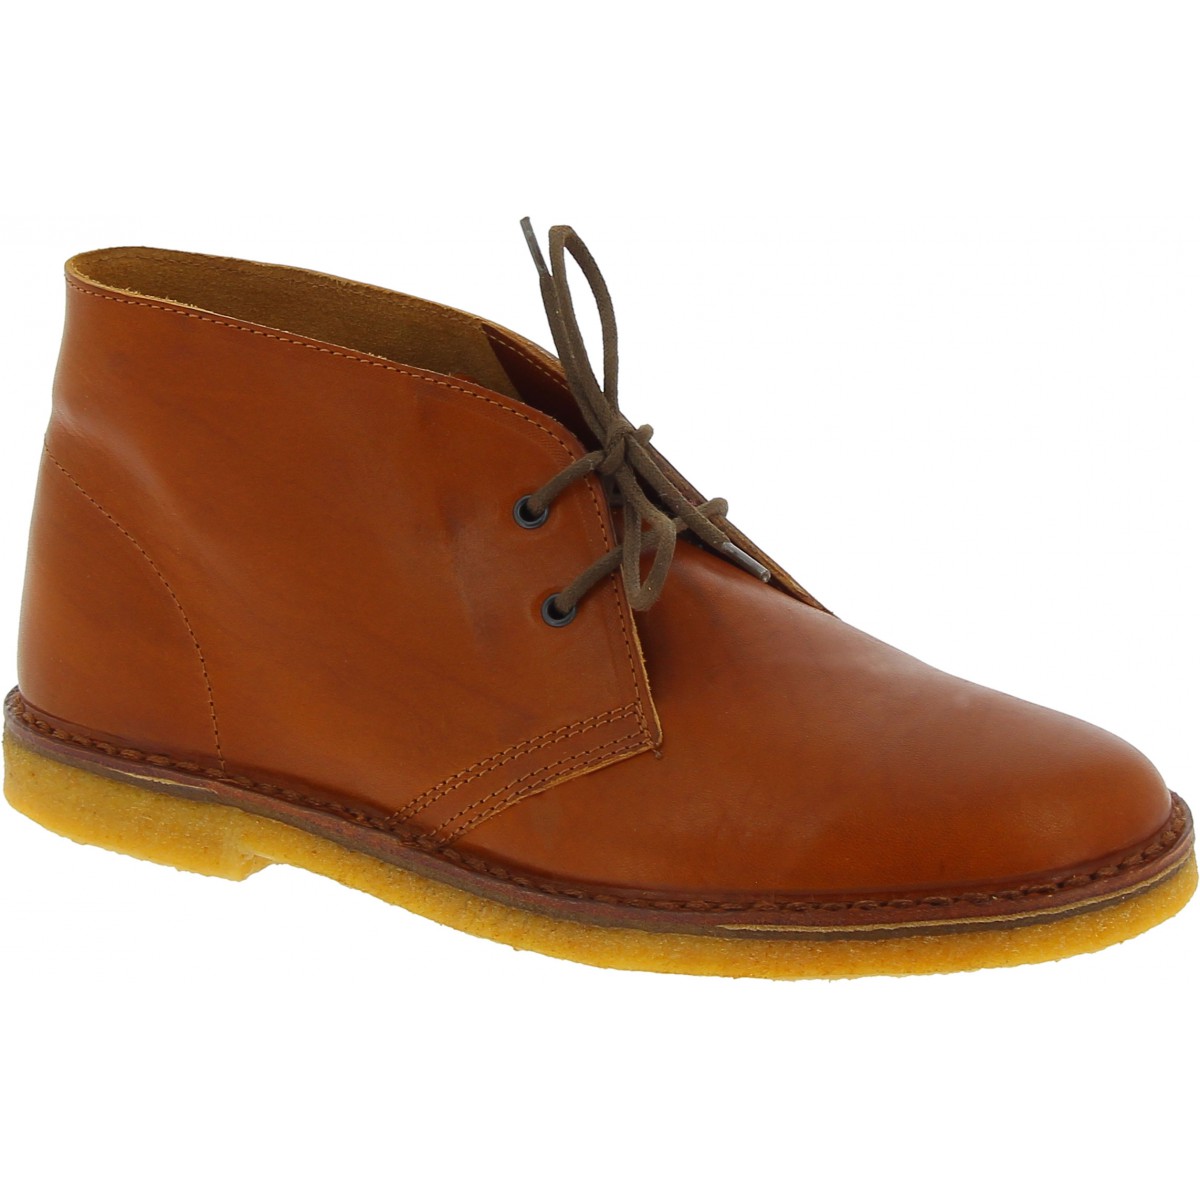 Women's tan leather chukka boots handmade in Italy | The leather craftsmen